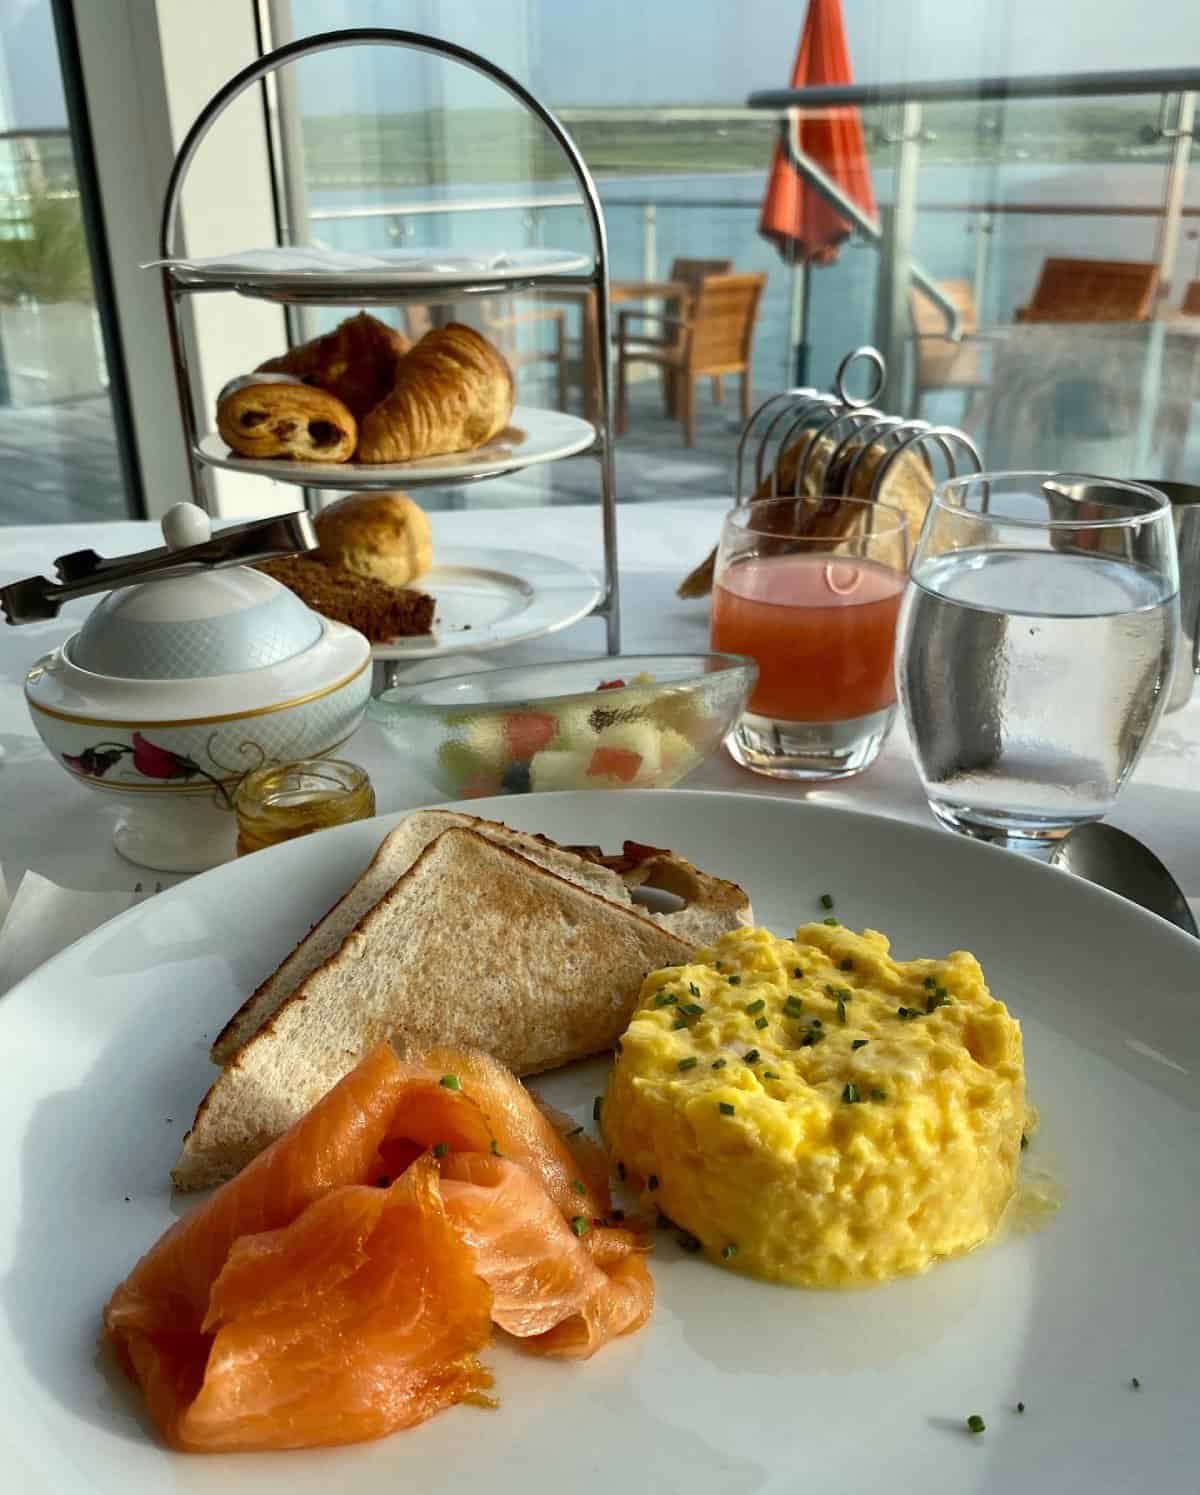 The complimentary breakfast was delicious - review of the Cliff House Hotel in Ardmore, Ireland